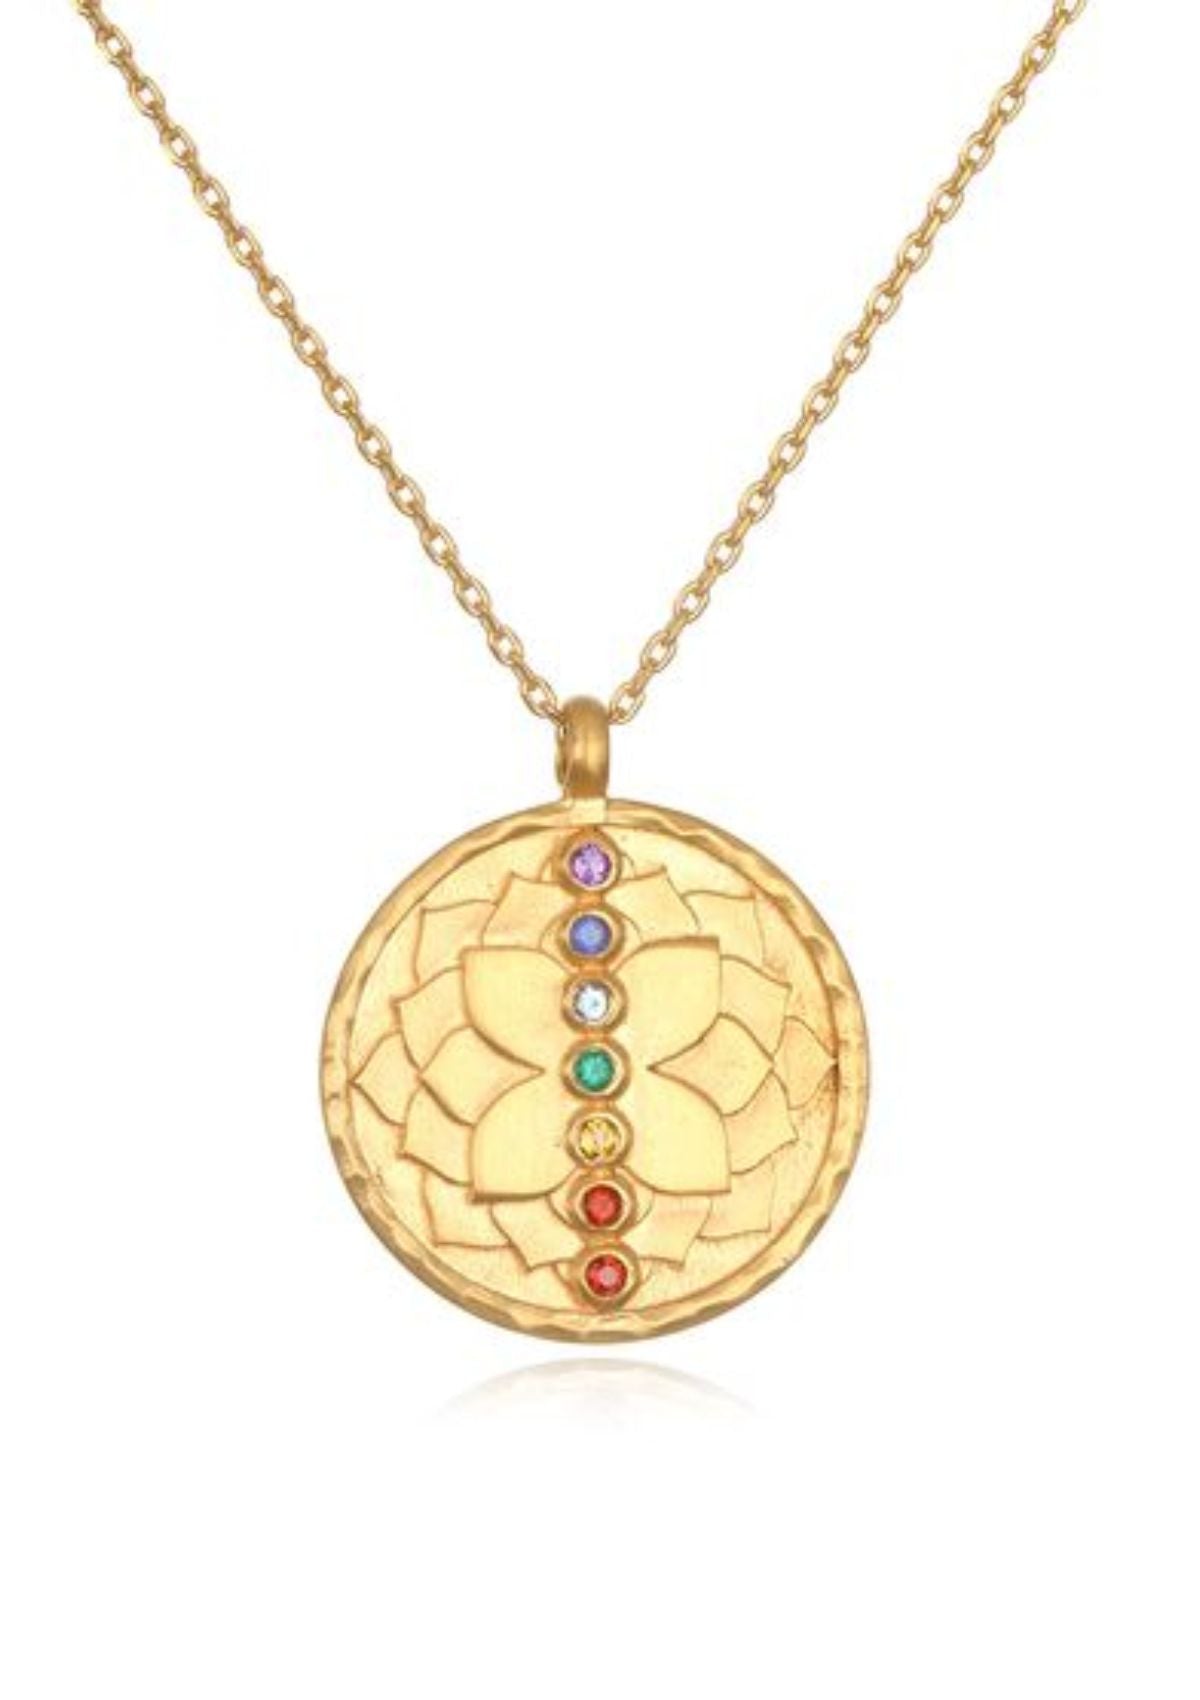 Round gold pendant with every color of chakras going vertical in middle. Starting from top: Purple, blue, white, green, yellow, orange, red.